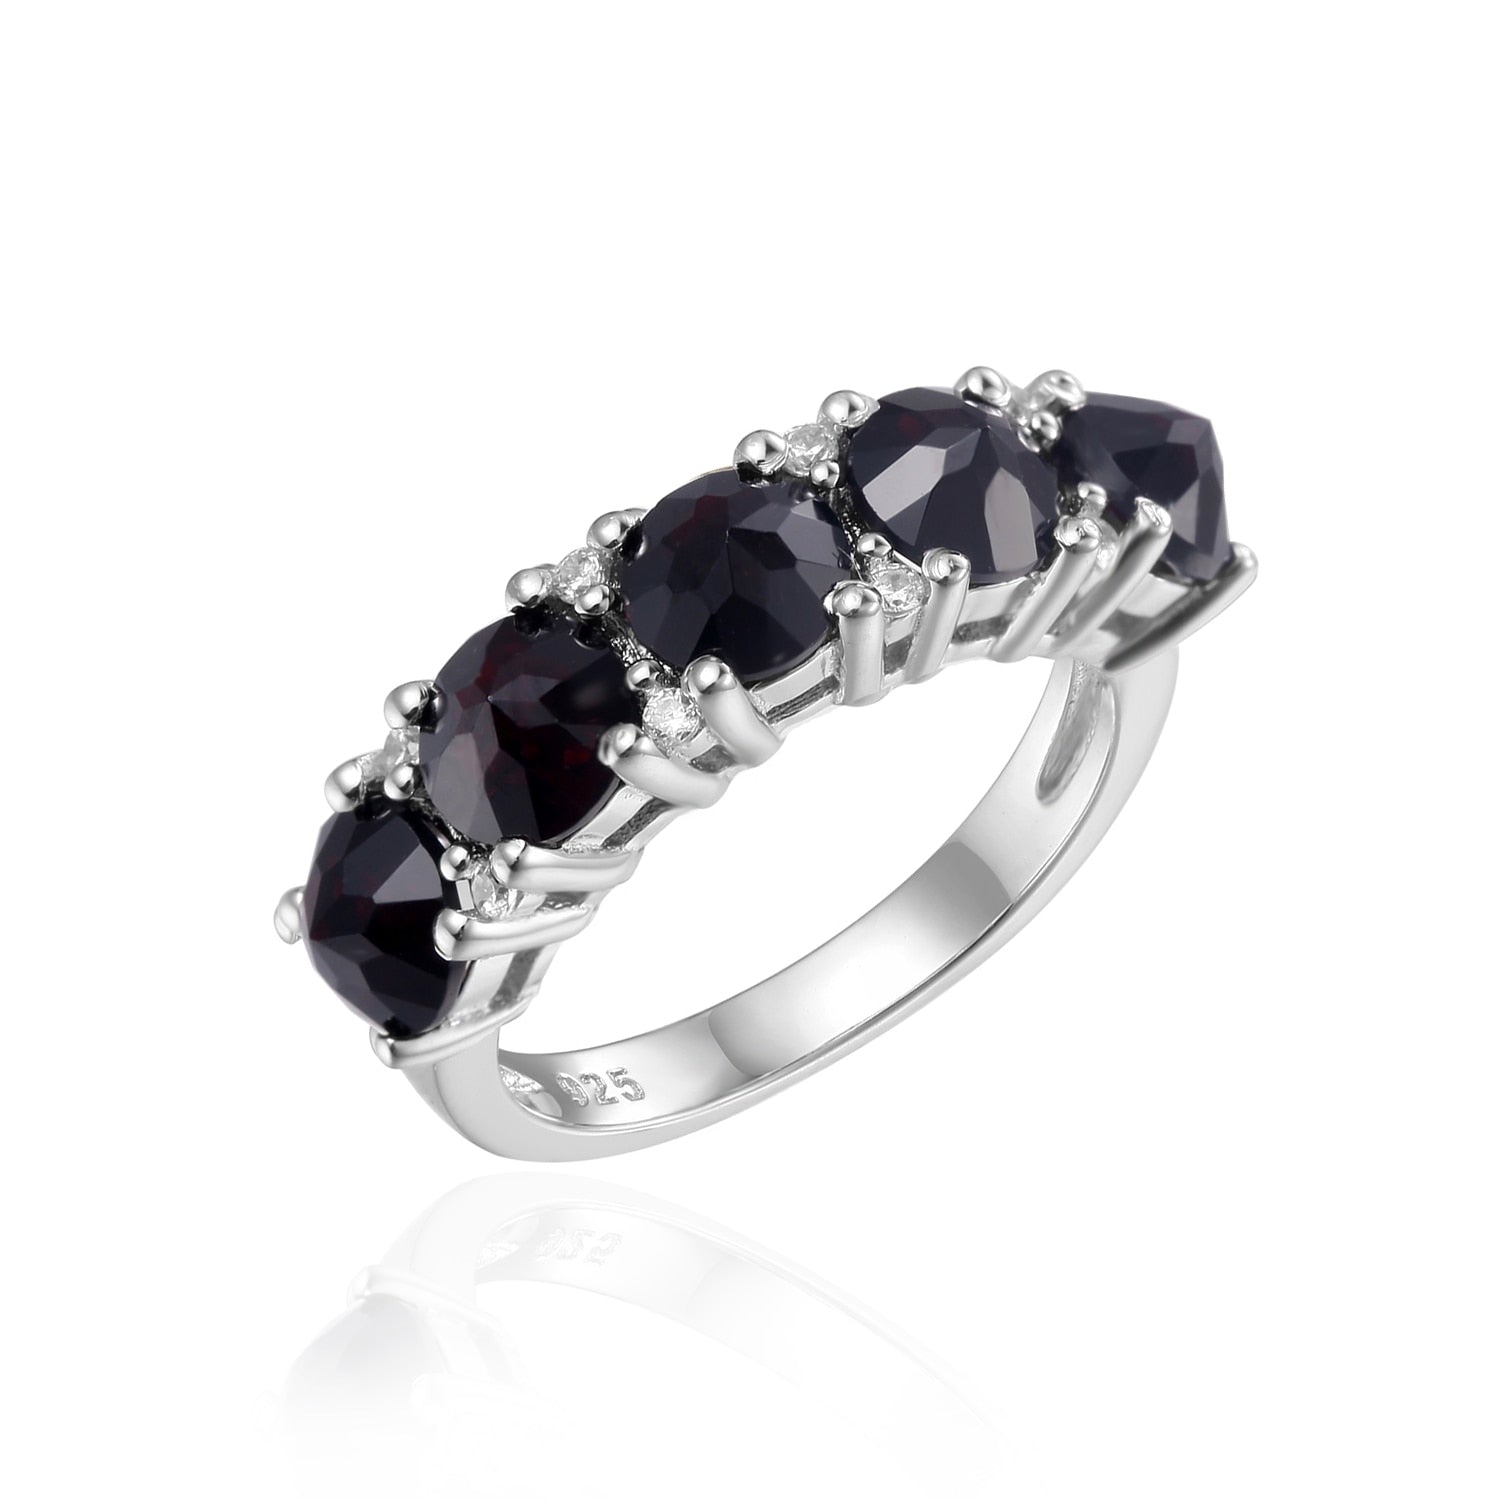 A silver ring set with five black gems.